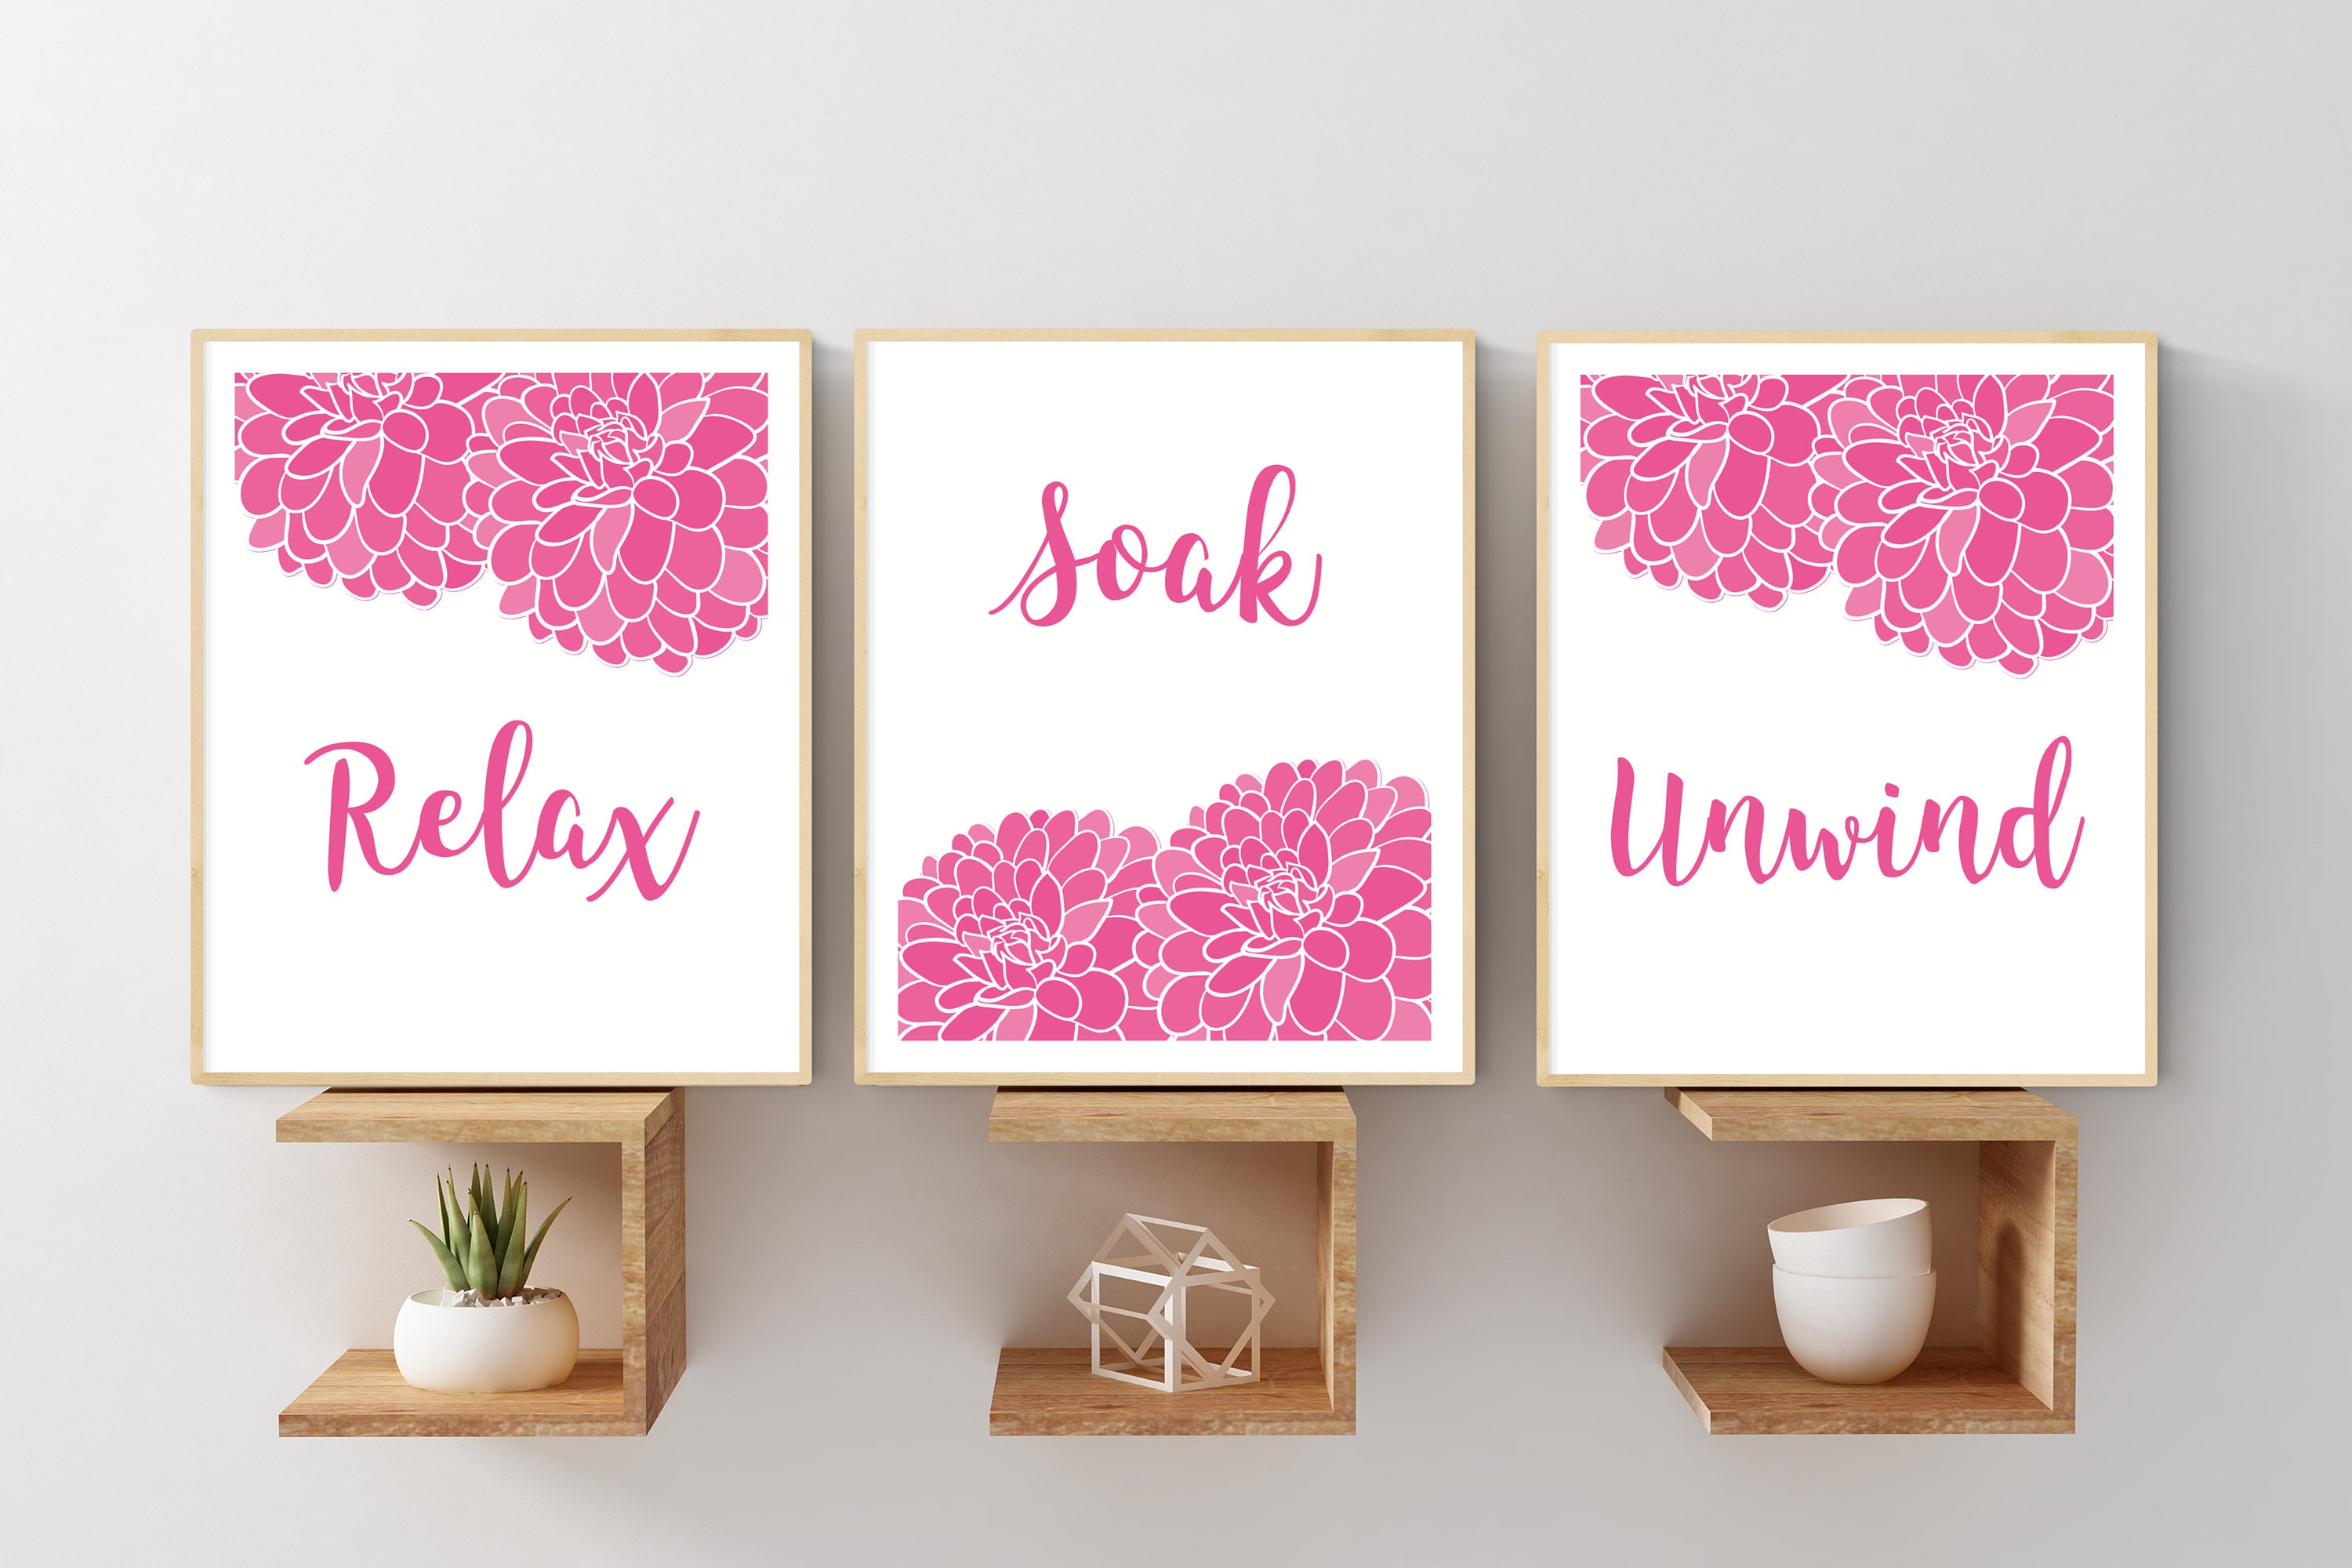 Rest Stars Wall Art Relaxing Text Printable Bathroom Affirmation Pink Unwind Chill RELAX Breathe Instant Digital Download Poster